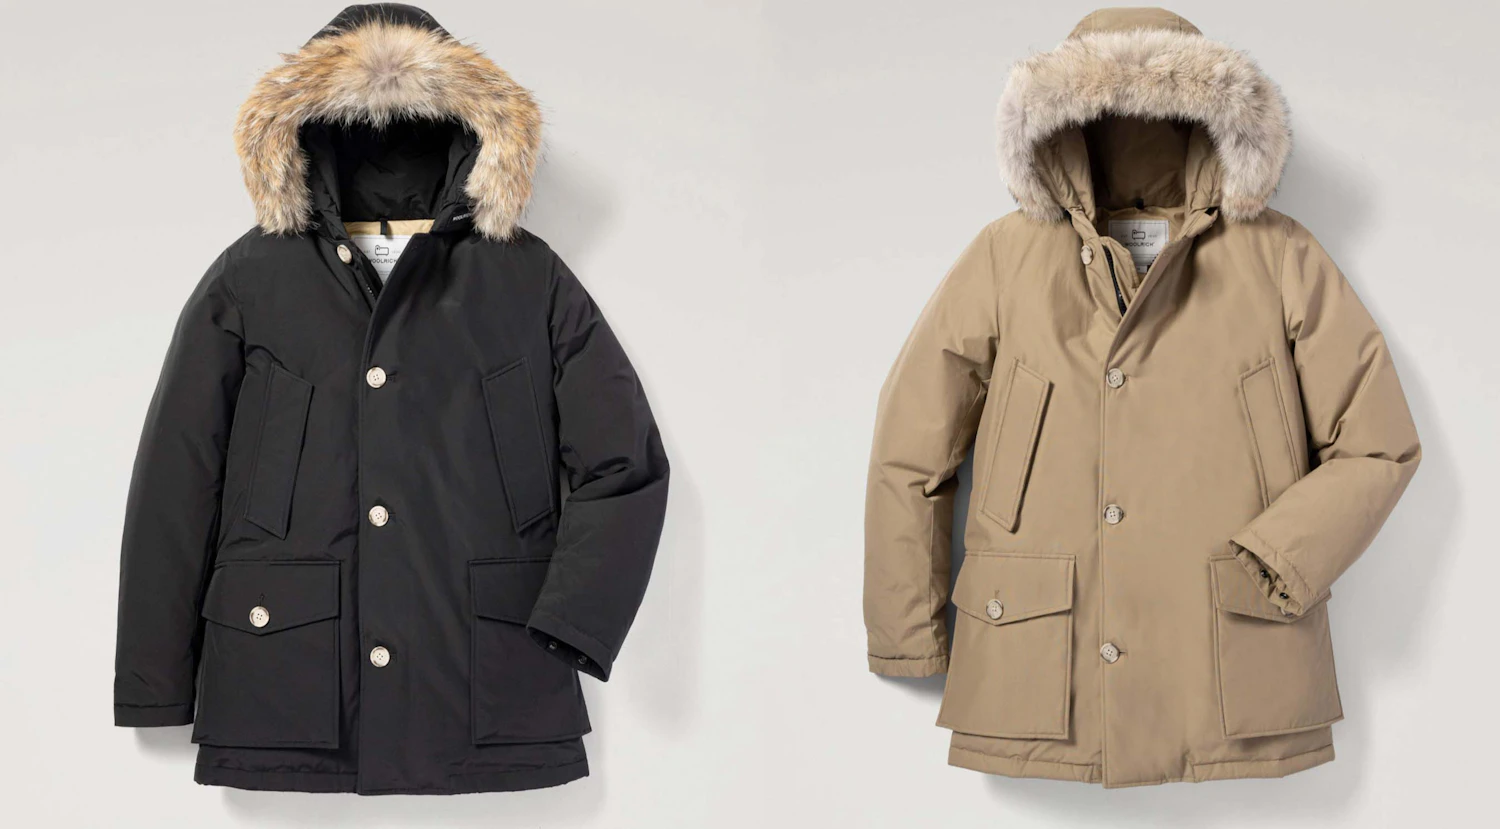 Why Parkas Are Superior to Jackets